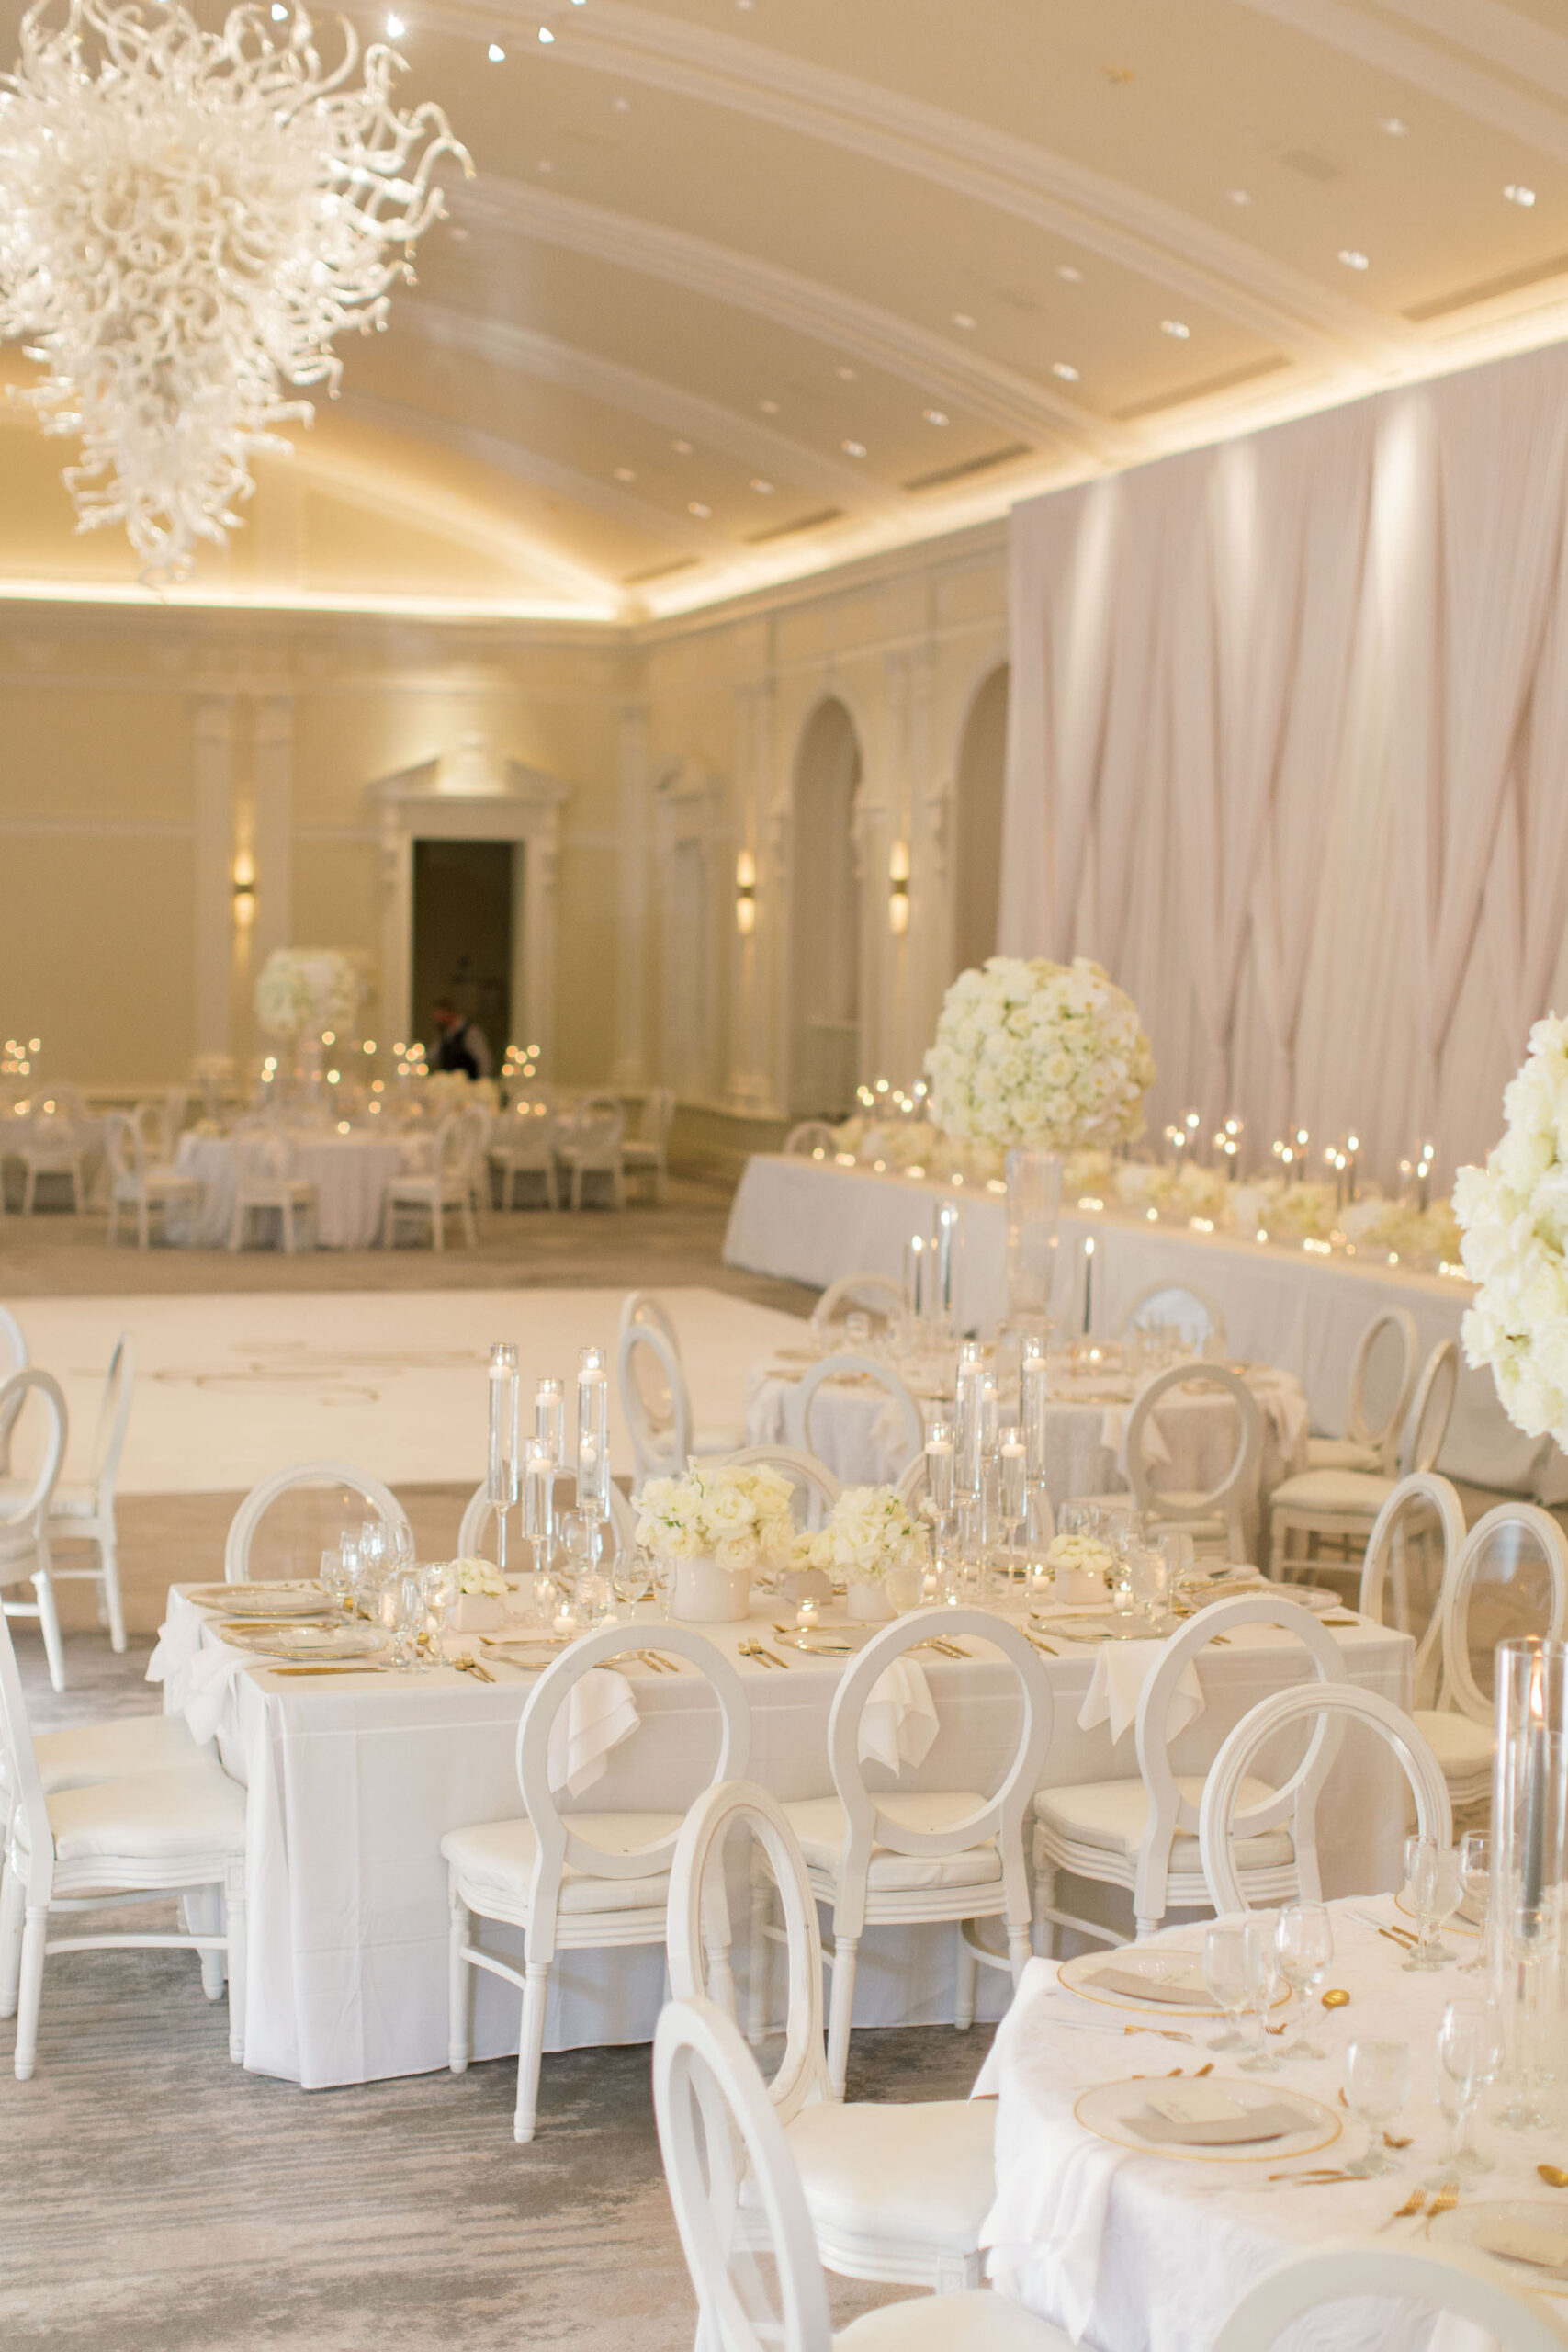 Timeless Classic Wedding Reception Ballroom Decor, Tables with White Linens, Elegant White Dining Chairs, Tall White Orchid Floral Centerpieces, Candlesticks | Tampa Bay Wedding Planner Parties A'la Carte | St. Pete Wedding Venue The Vinoy Renaissance | Wedding Florist Bruce Wayne Florals